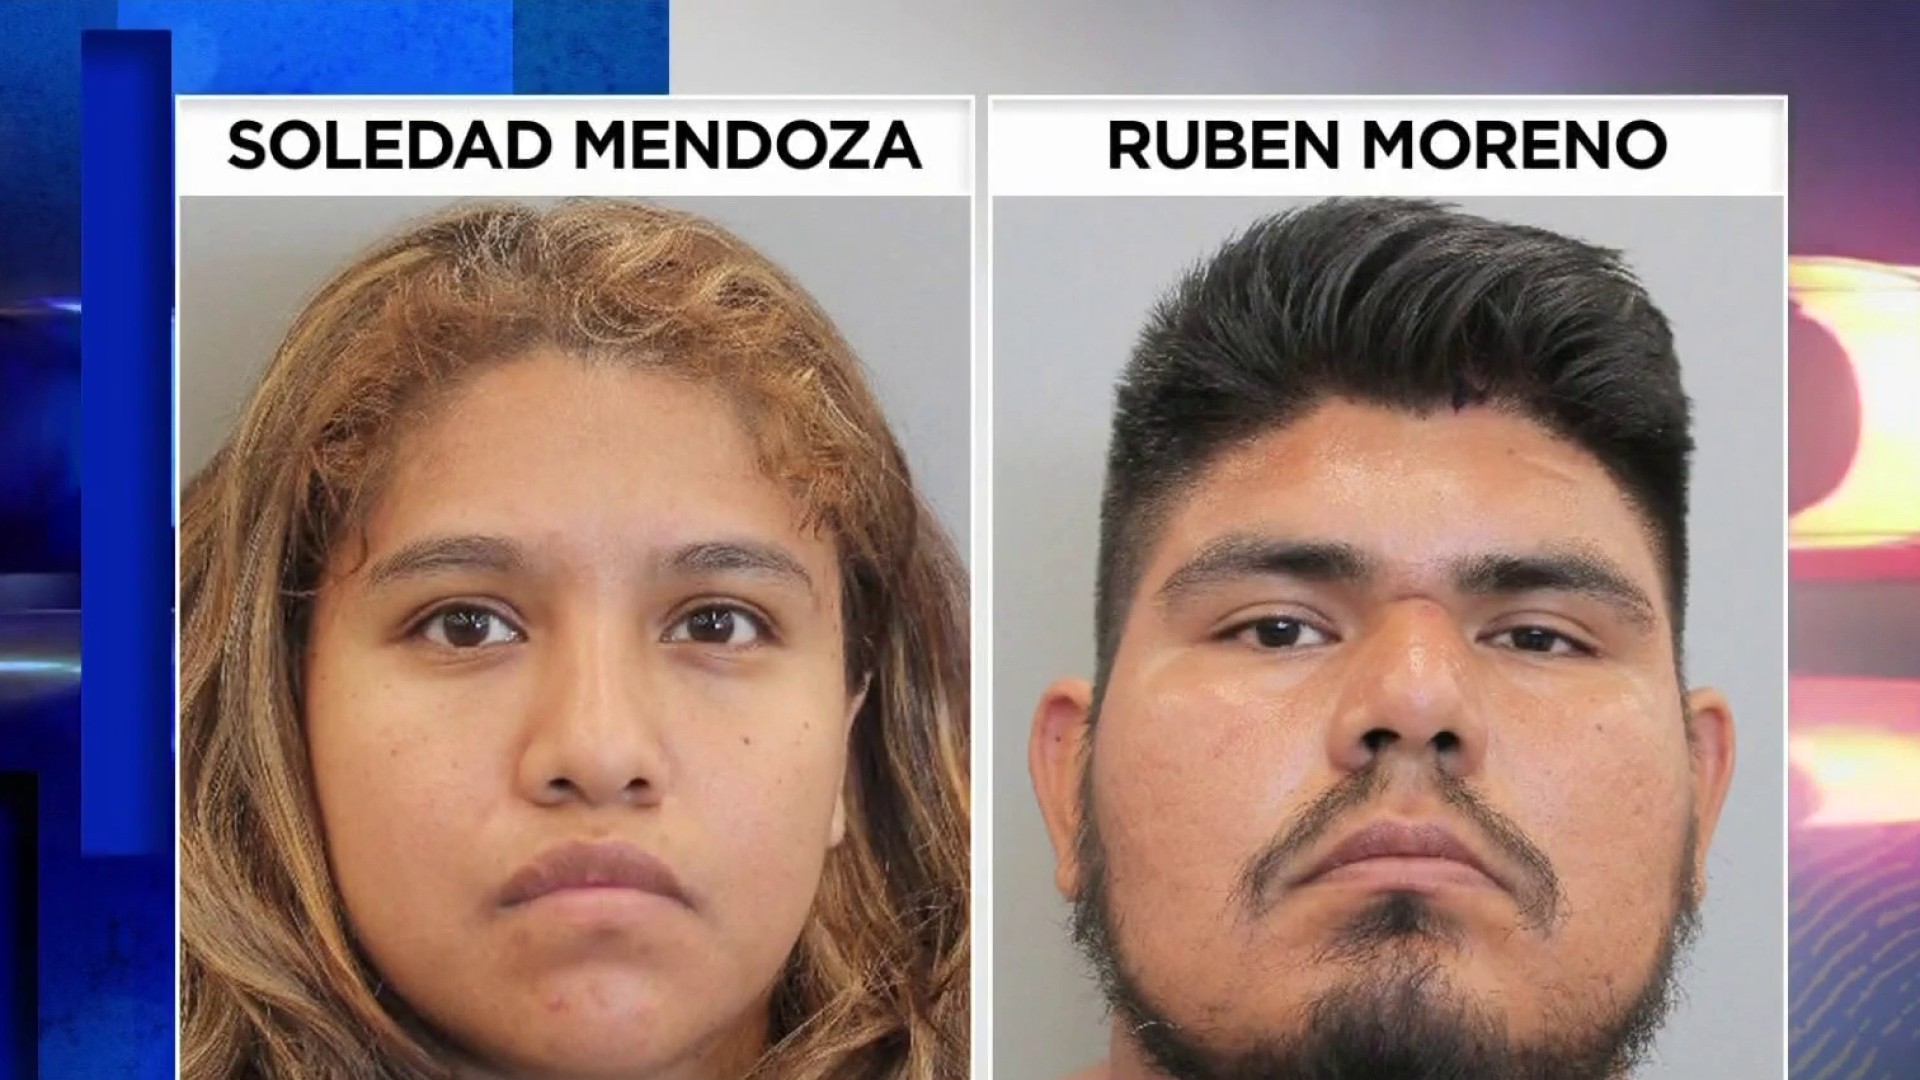 Houston Mother and Her Boyfriend Charged with Capital Murder After Her Eight-Year-Old Daughter Who Weighed 29 Pounds Dies